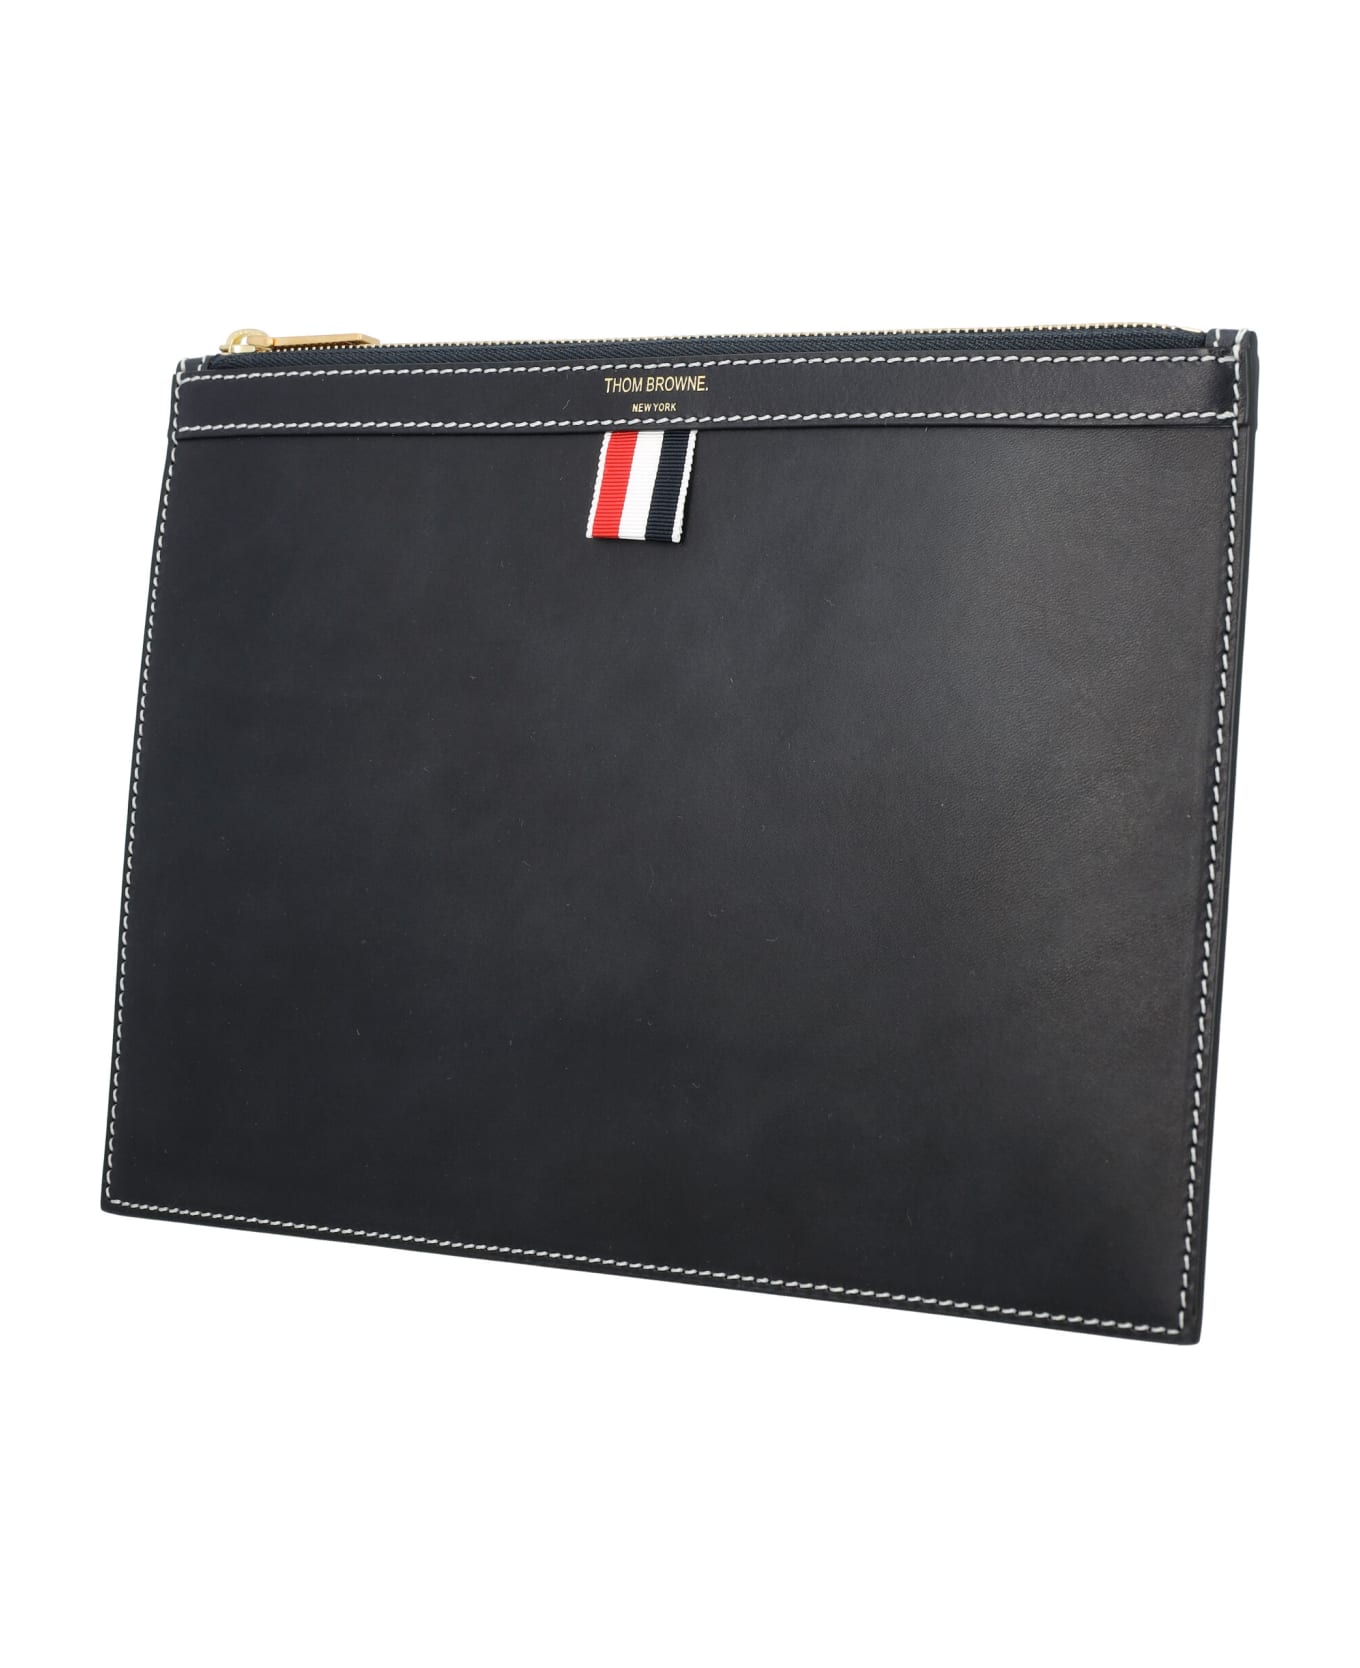 Thom Browne Document Holder Small - NAVY